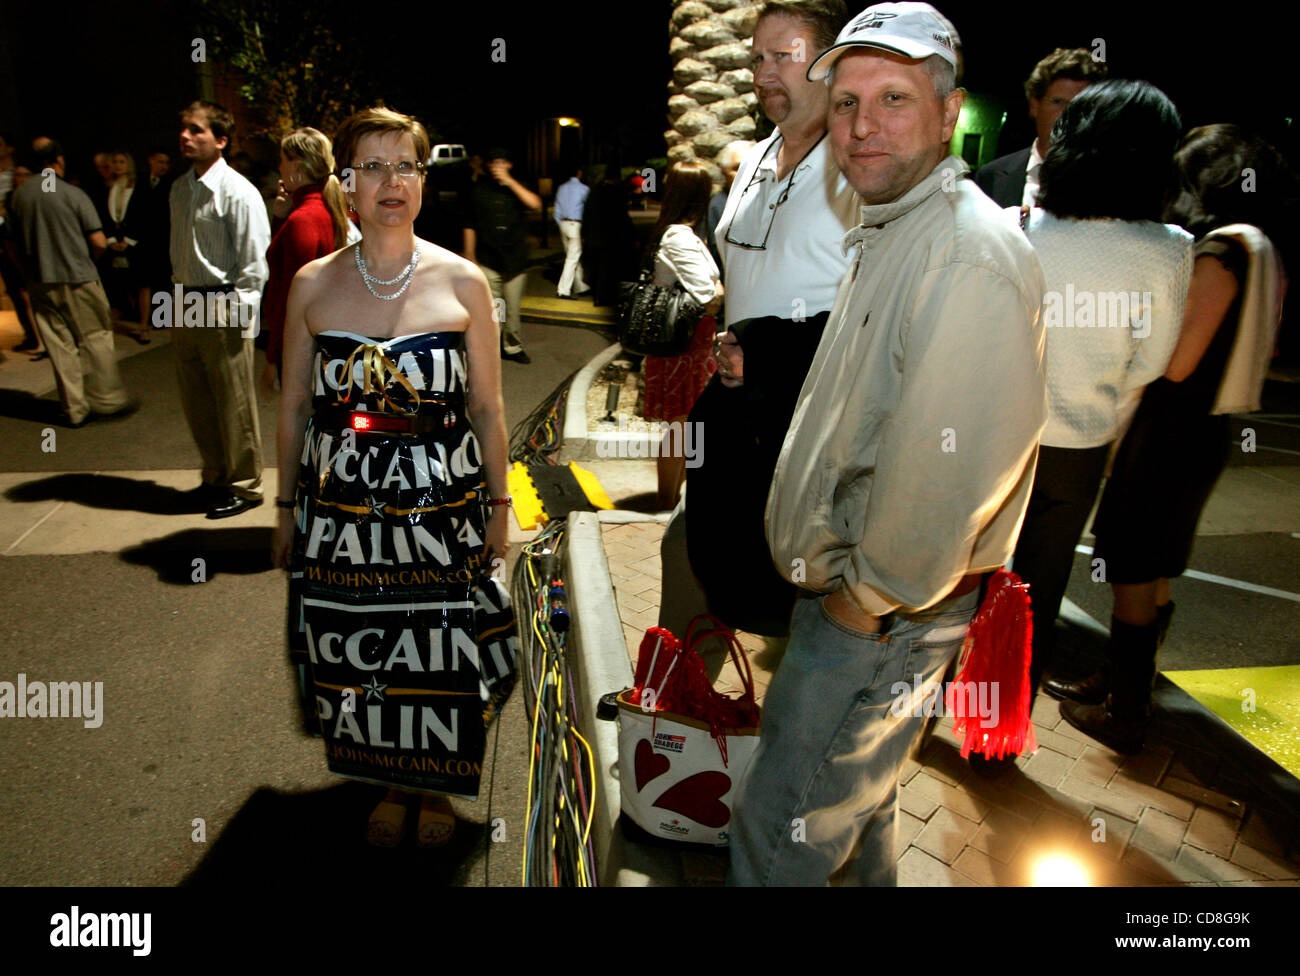 Nov 04, 2008 - Phoenix, Arizona, USA - Supporters of John McCain wait for election results at McCain headquarters on the grounds of the Biltmore Hotel in Phoenix on election day for the 2008 Presidential election. (Credit Image: © Jonathan Alcorn/ZUMA Press) Stock Photo